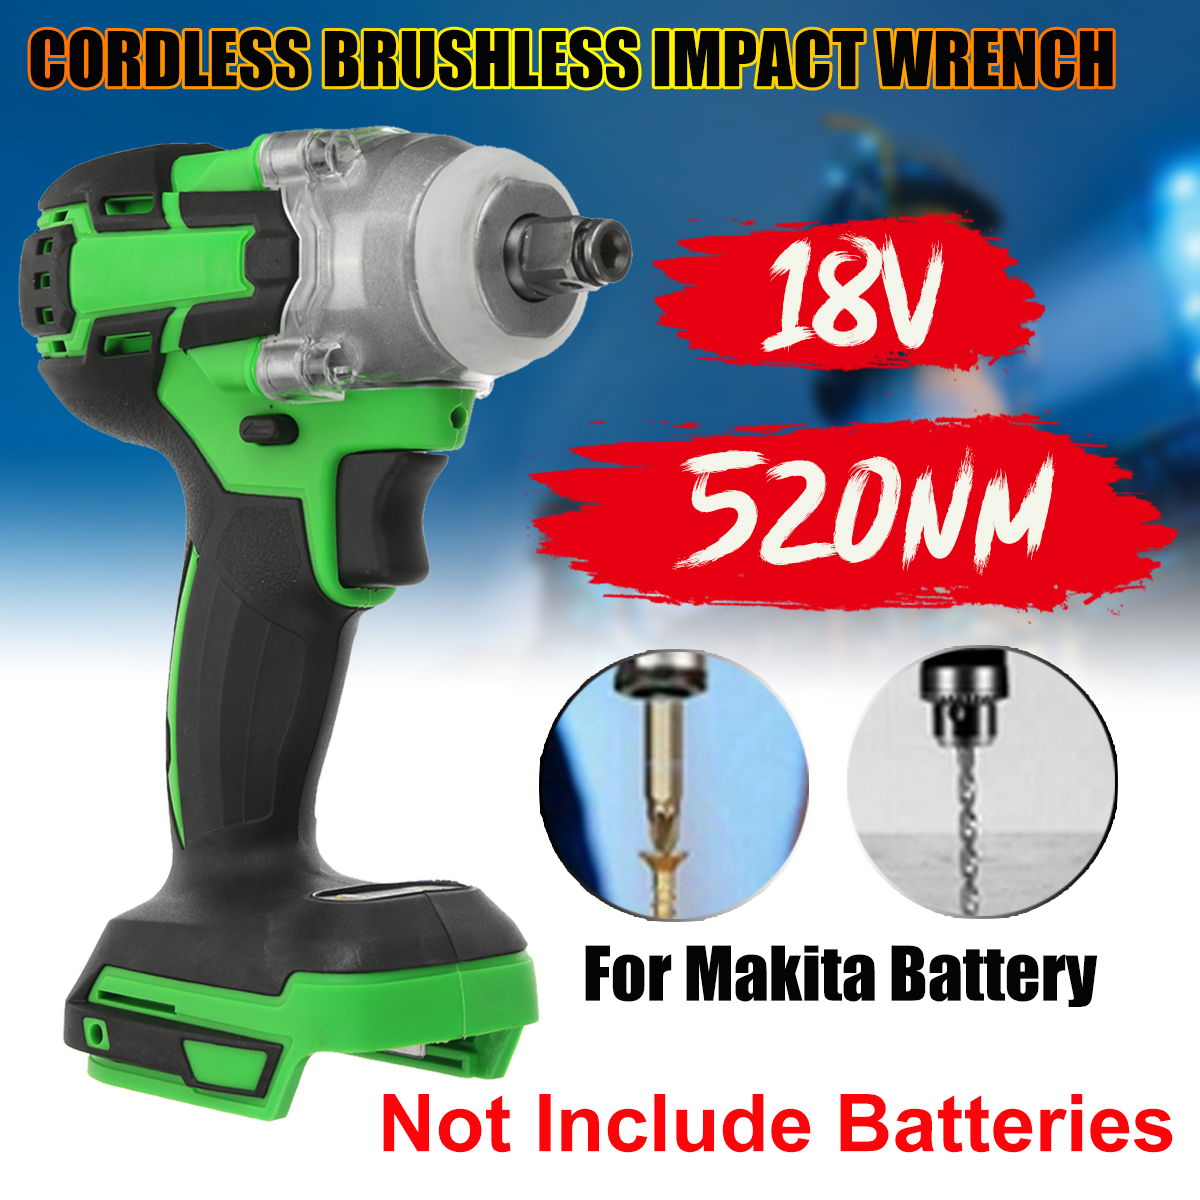 520NM-Torque-Brushless-Impact-Wrench-Screwdriver-Cordless-Rechargable-Electric-Wrench-Driver-Tool-St-1610036-2